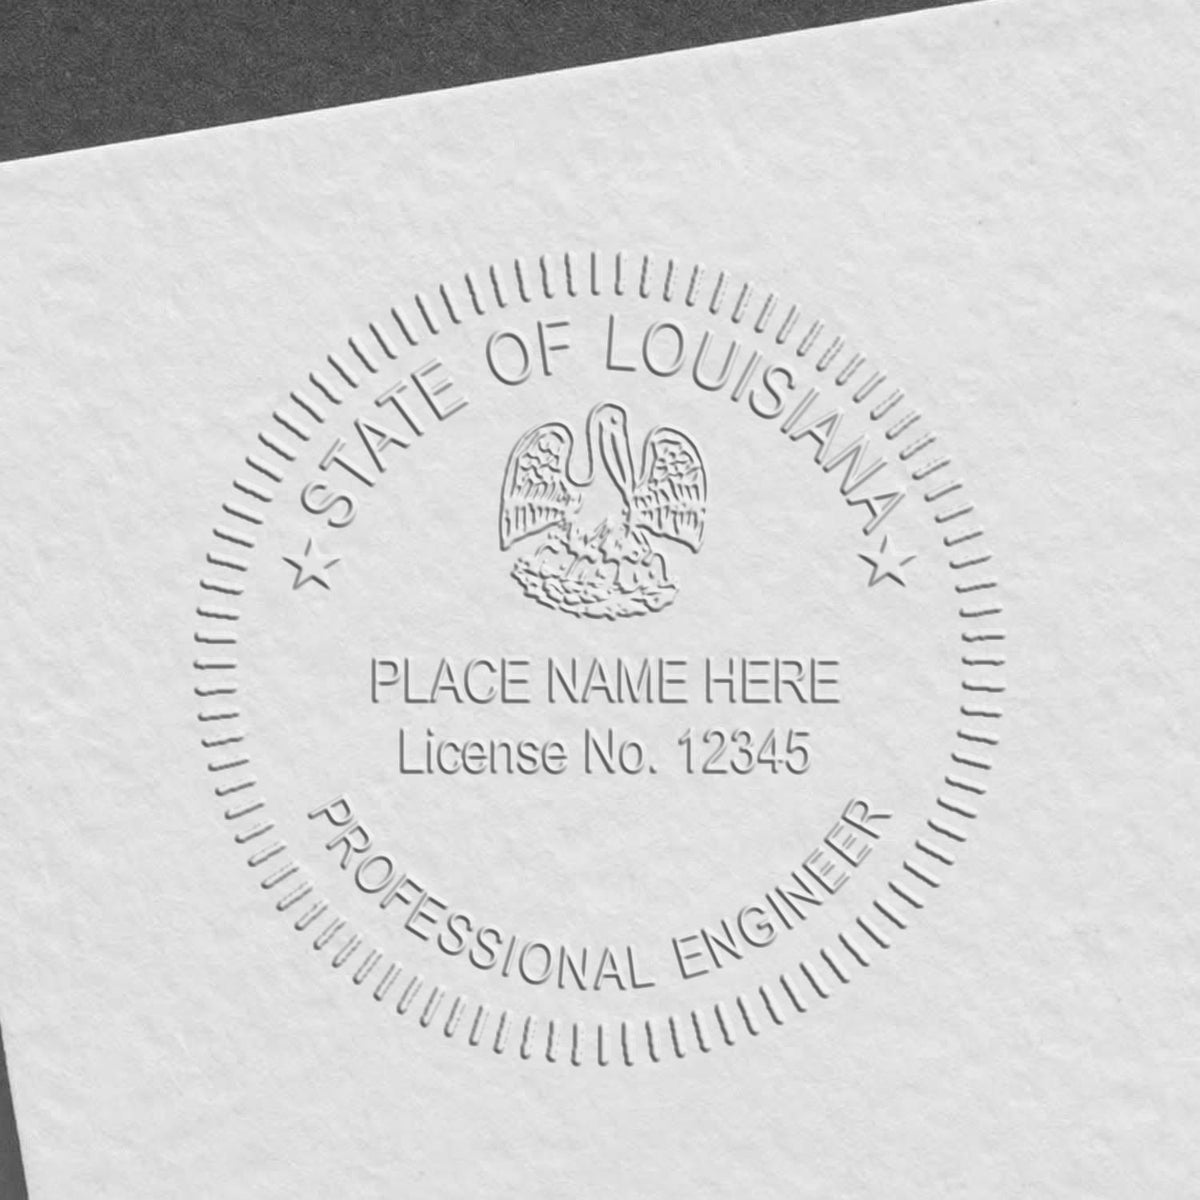 The State of Louisiana Extended Long Reach Engineer Seal stamp impression comes to life with a crisp, detailed photo on paper - showcasing true professional quality.